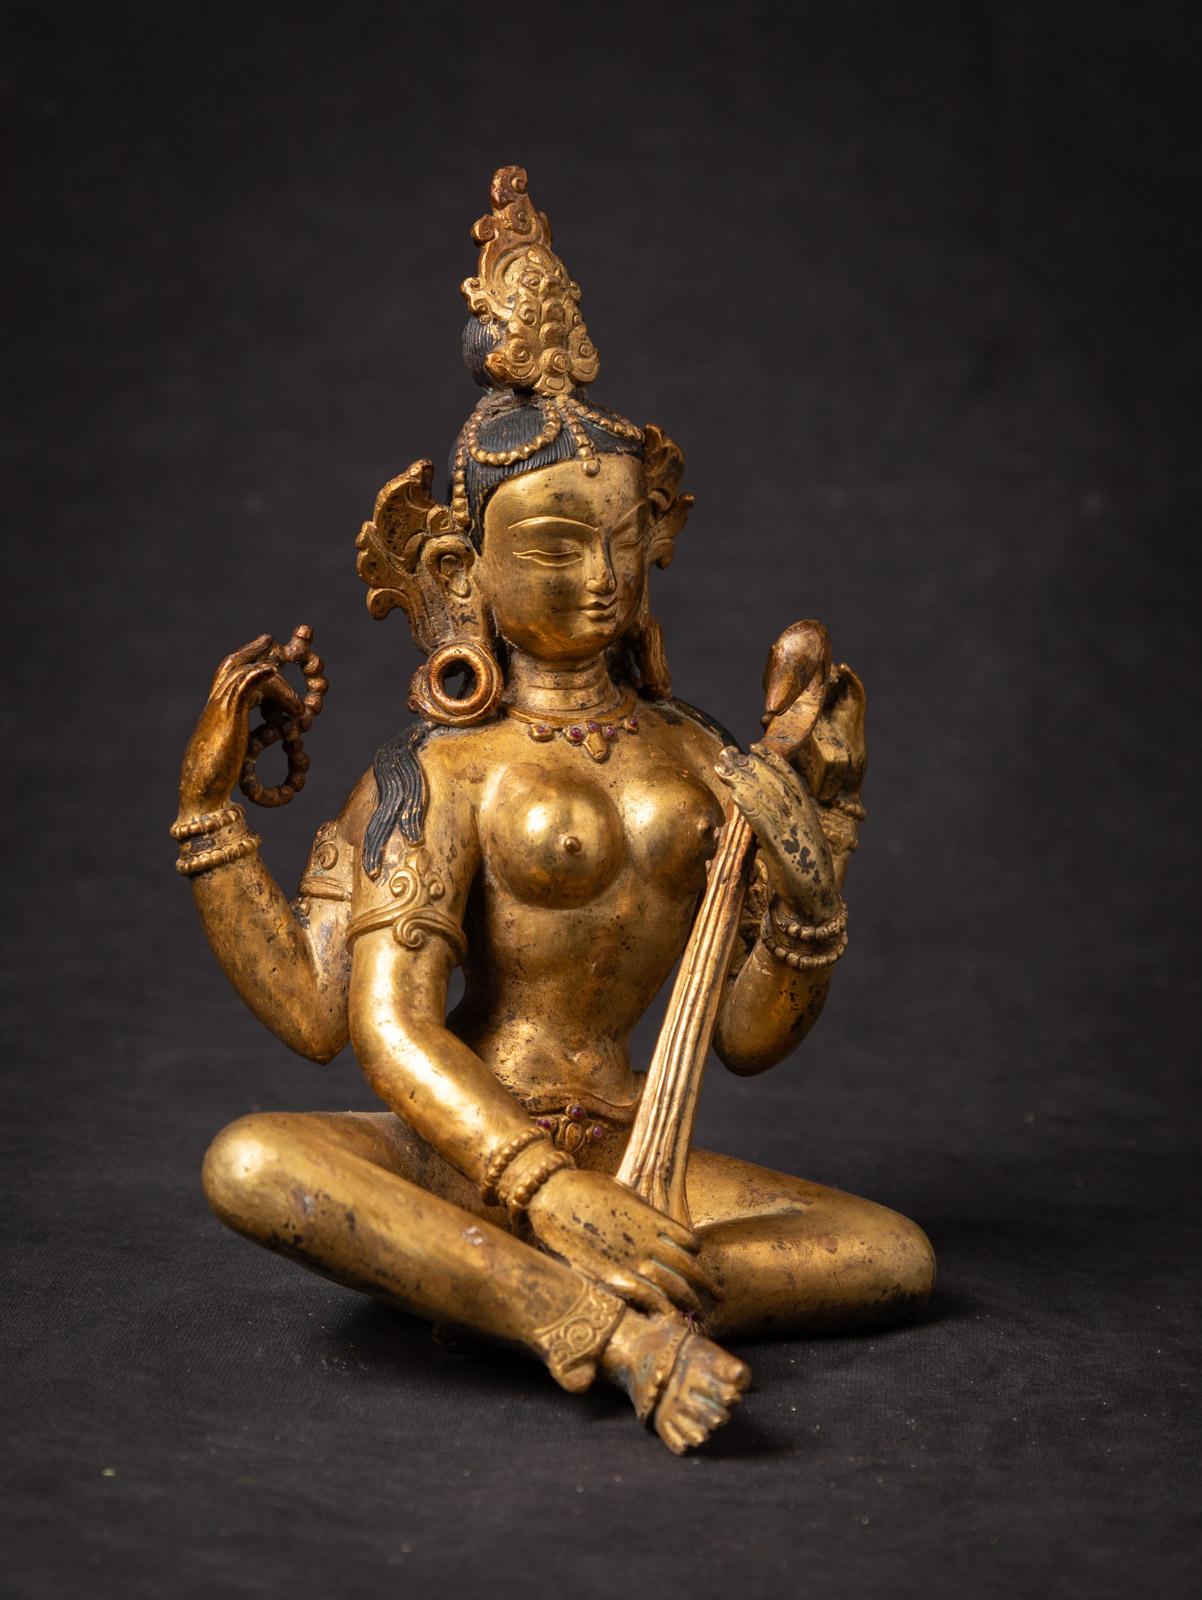 The Old bronze Nepali Saraswati statue is a captivating and spiritually significant artifact originating from Nepal. Crafted from bronze and adorned with fire gilding in 24-karat gold, this statue stands at 20,4 cm in height and measures 15,5 cm in